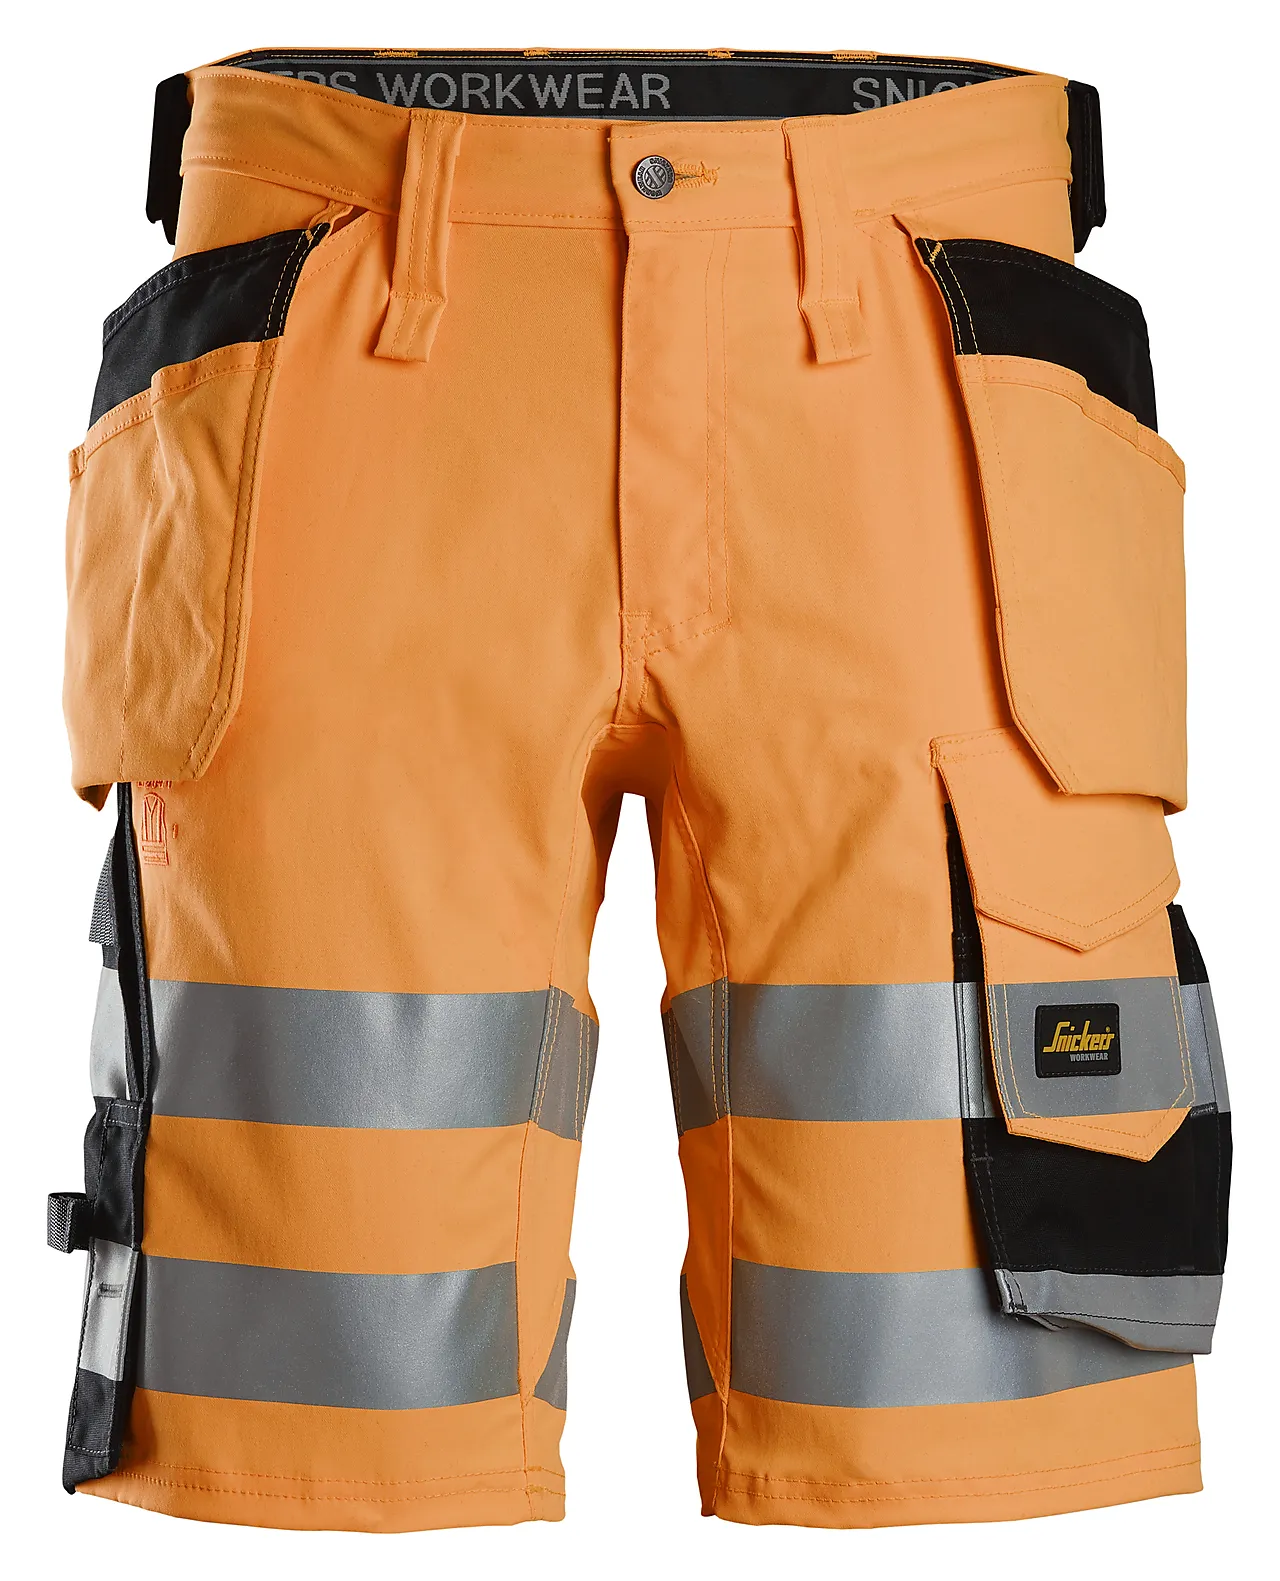 Shorts 6135 ora hl kl1 56 snickers workwear